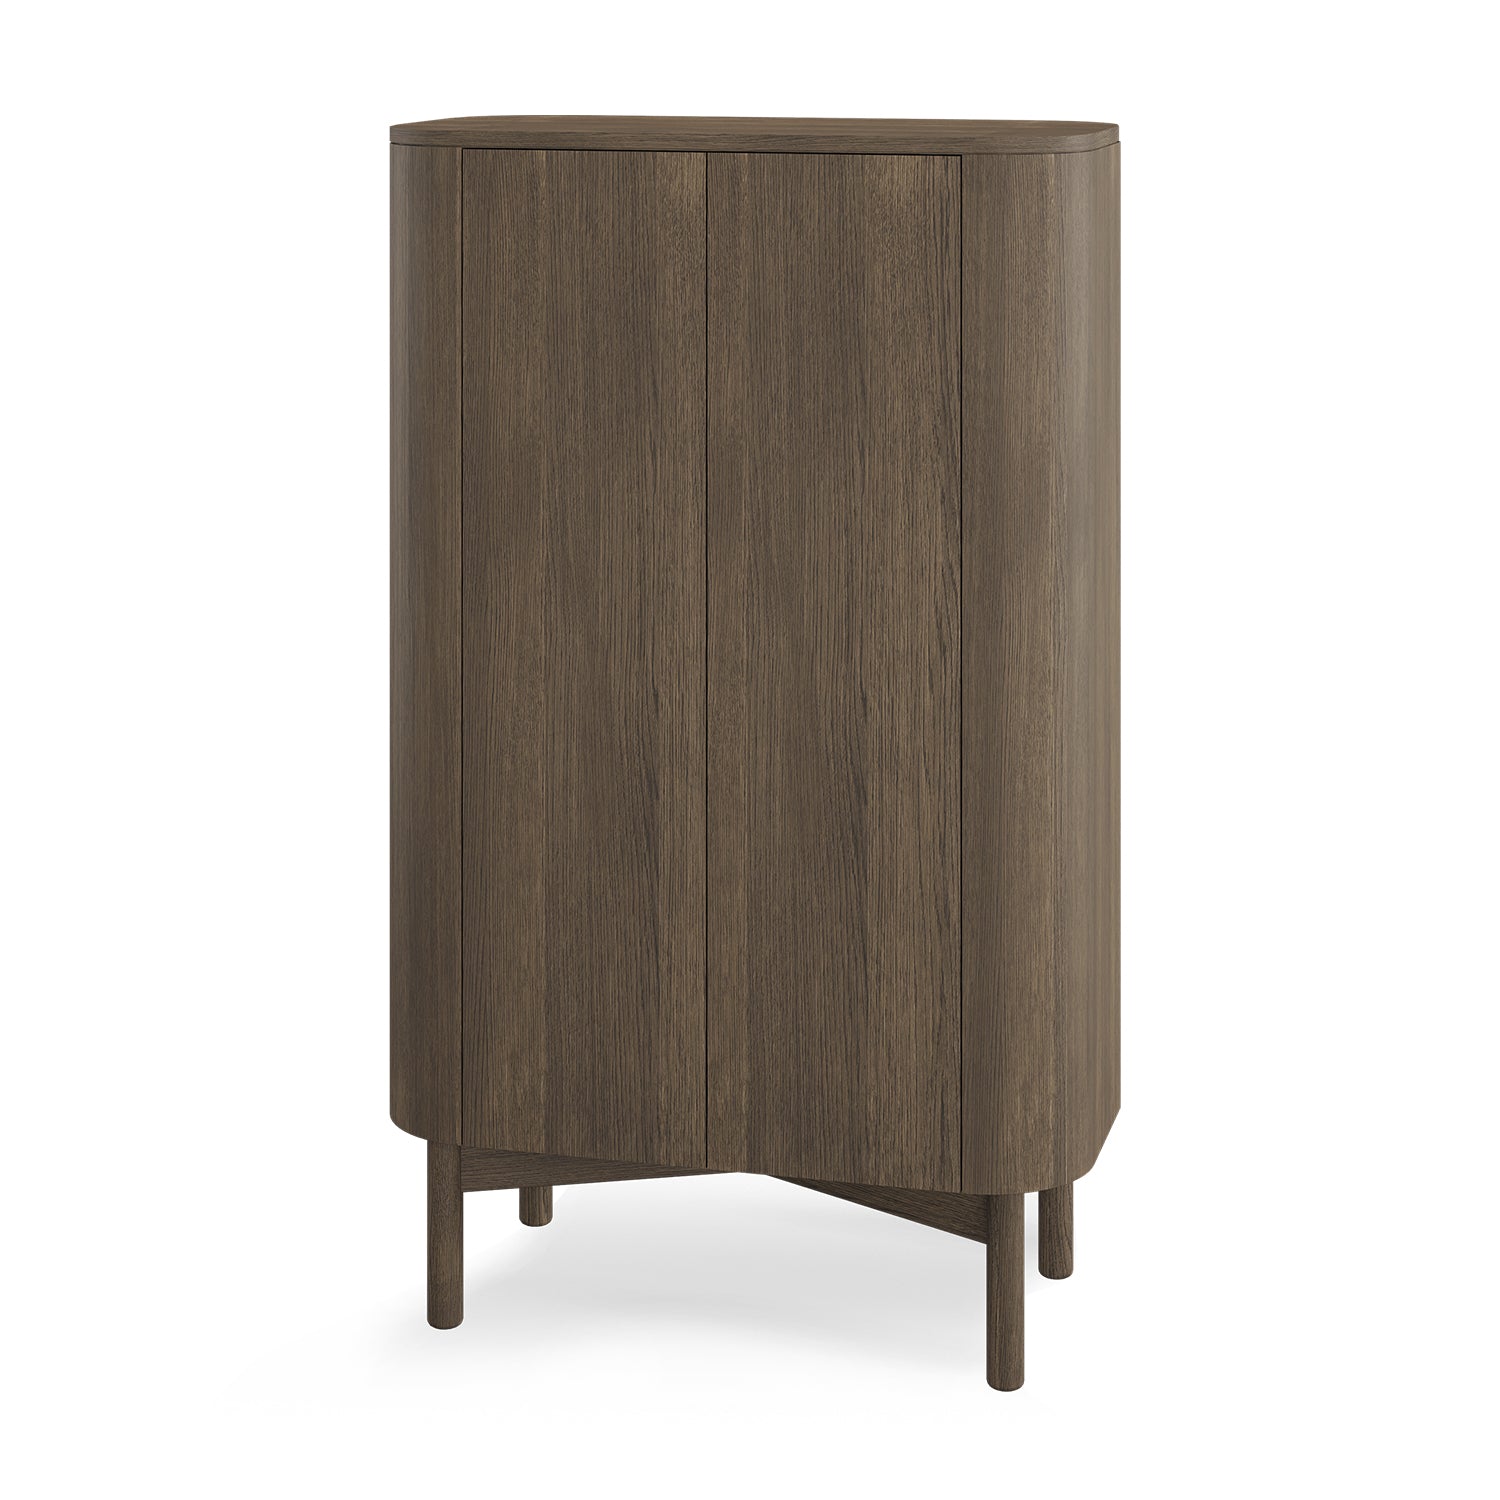 Loud Cabinet - The Design Choice